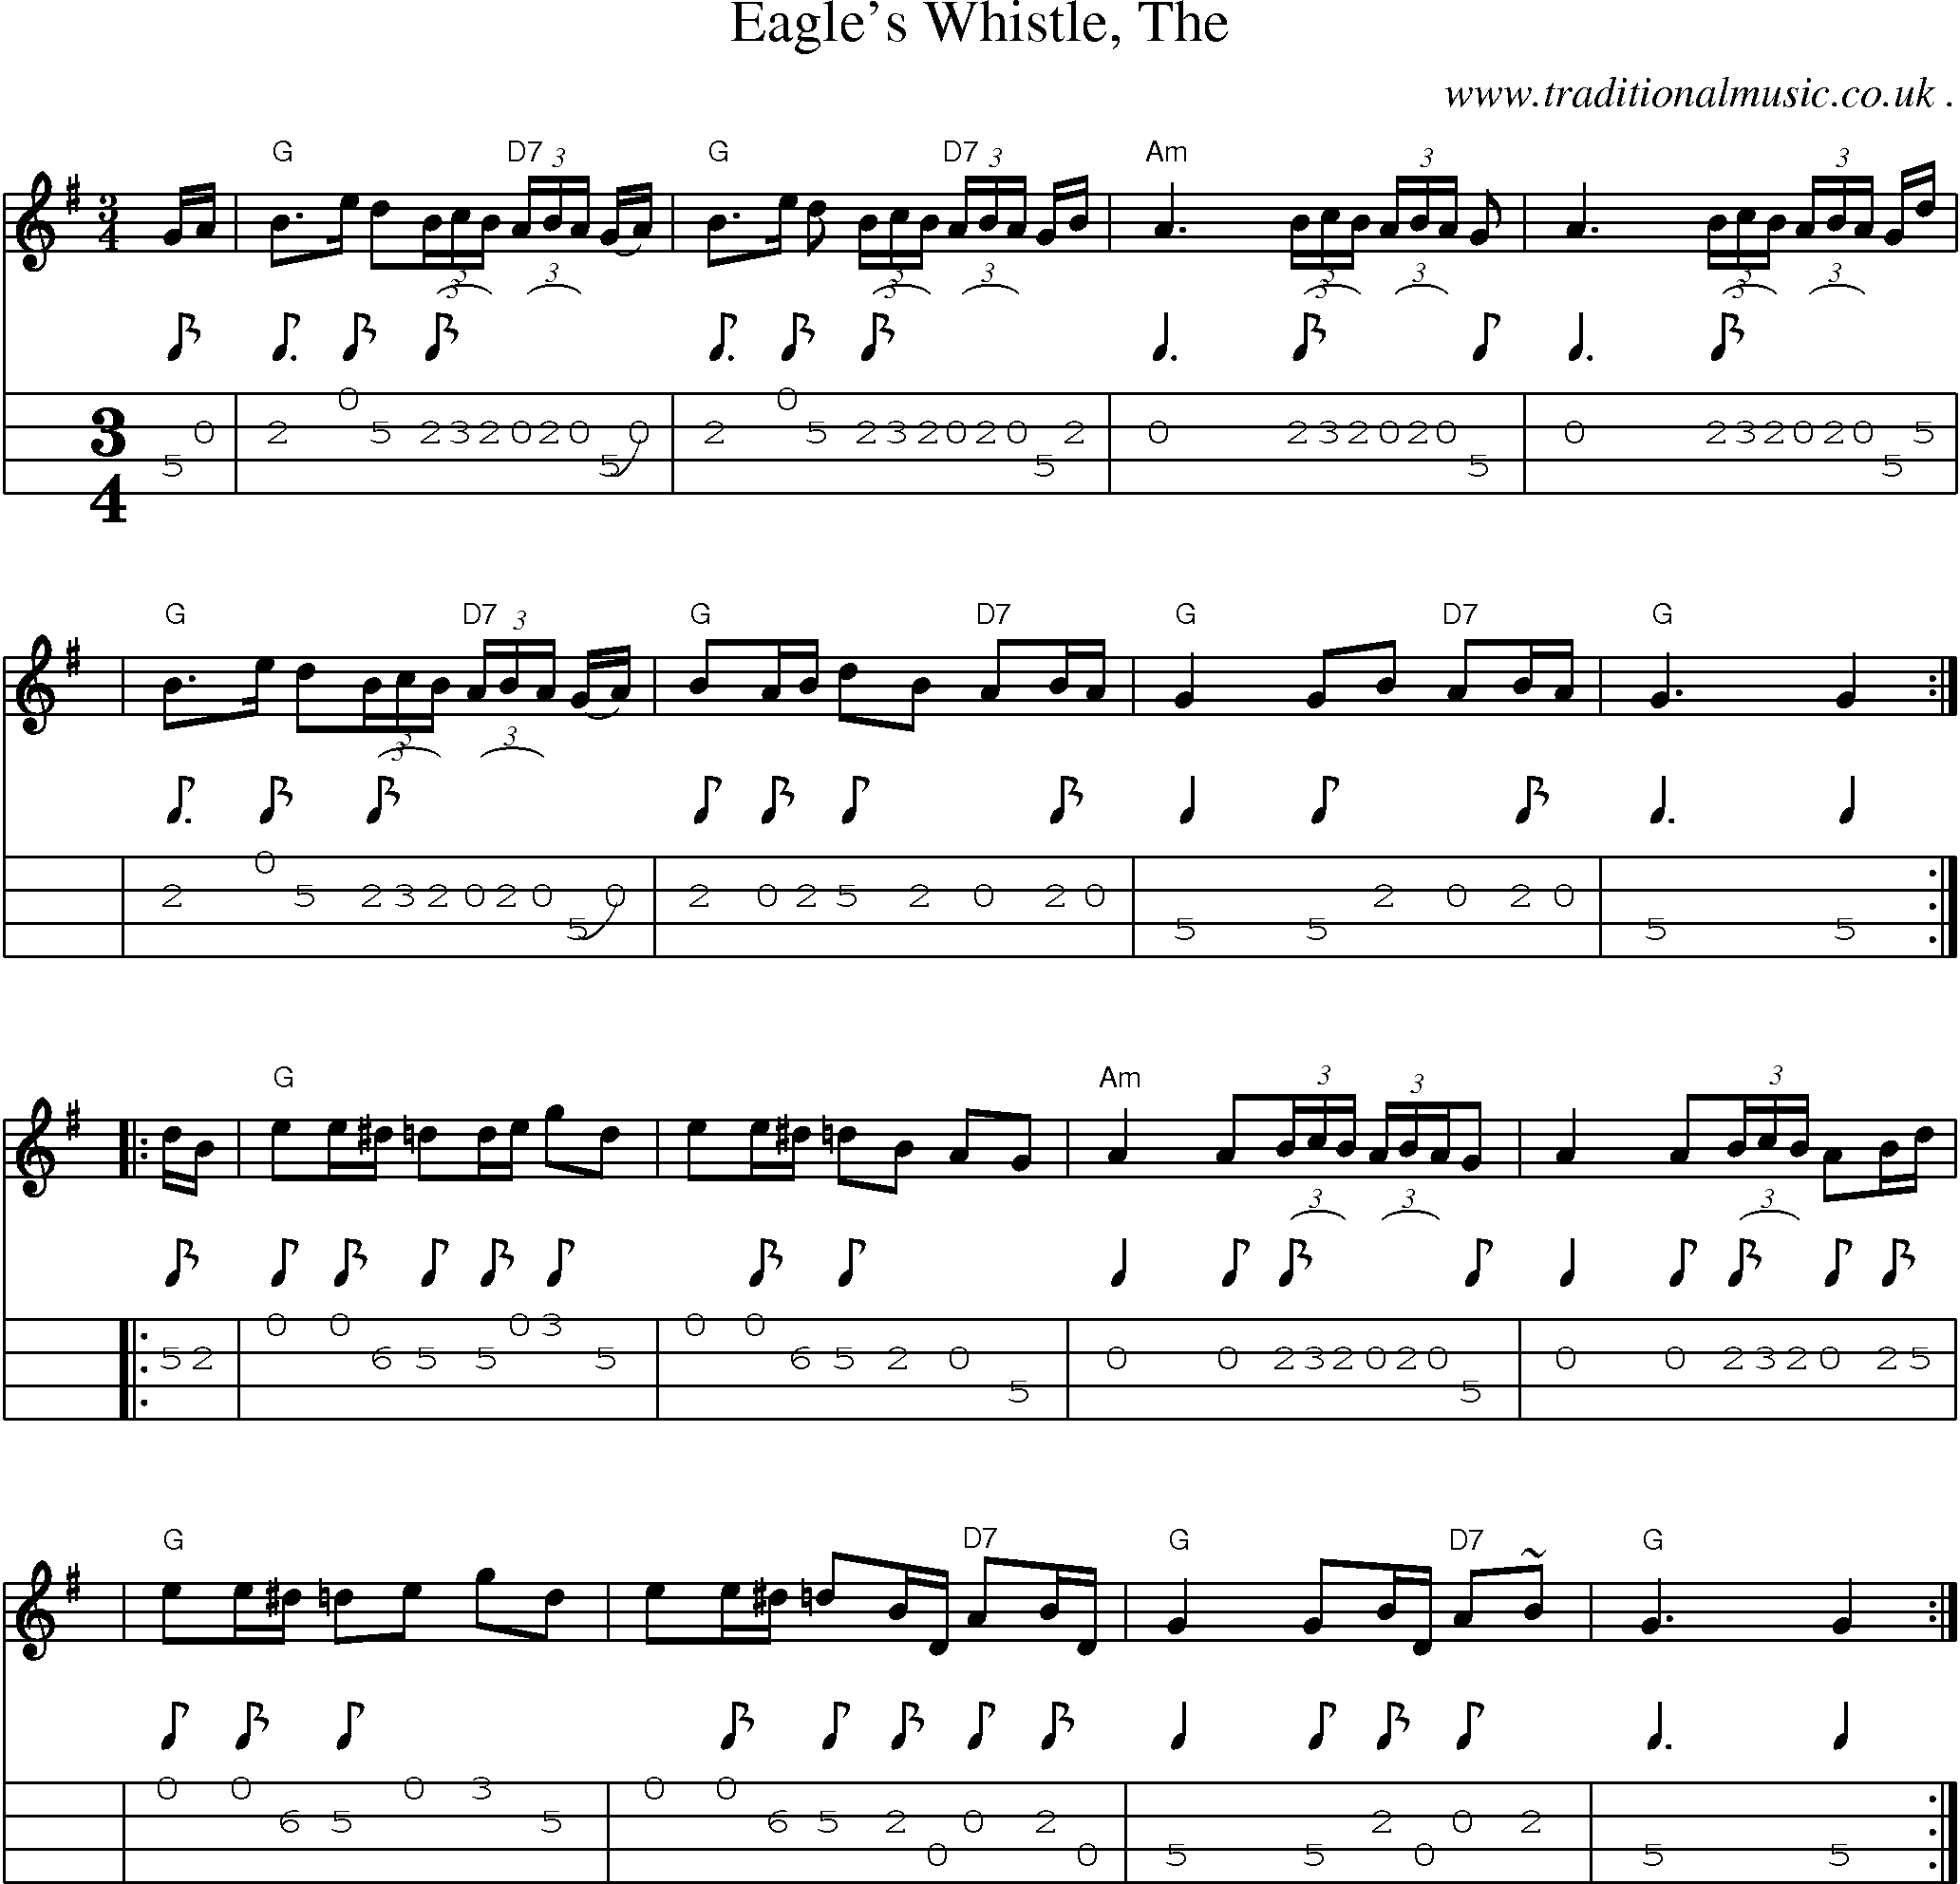 Sheet-music  score, Chords and Mandolin Tabs for Eagles Whistle The